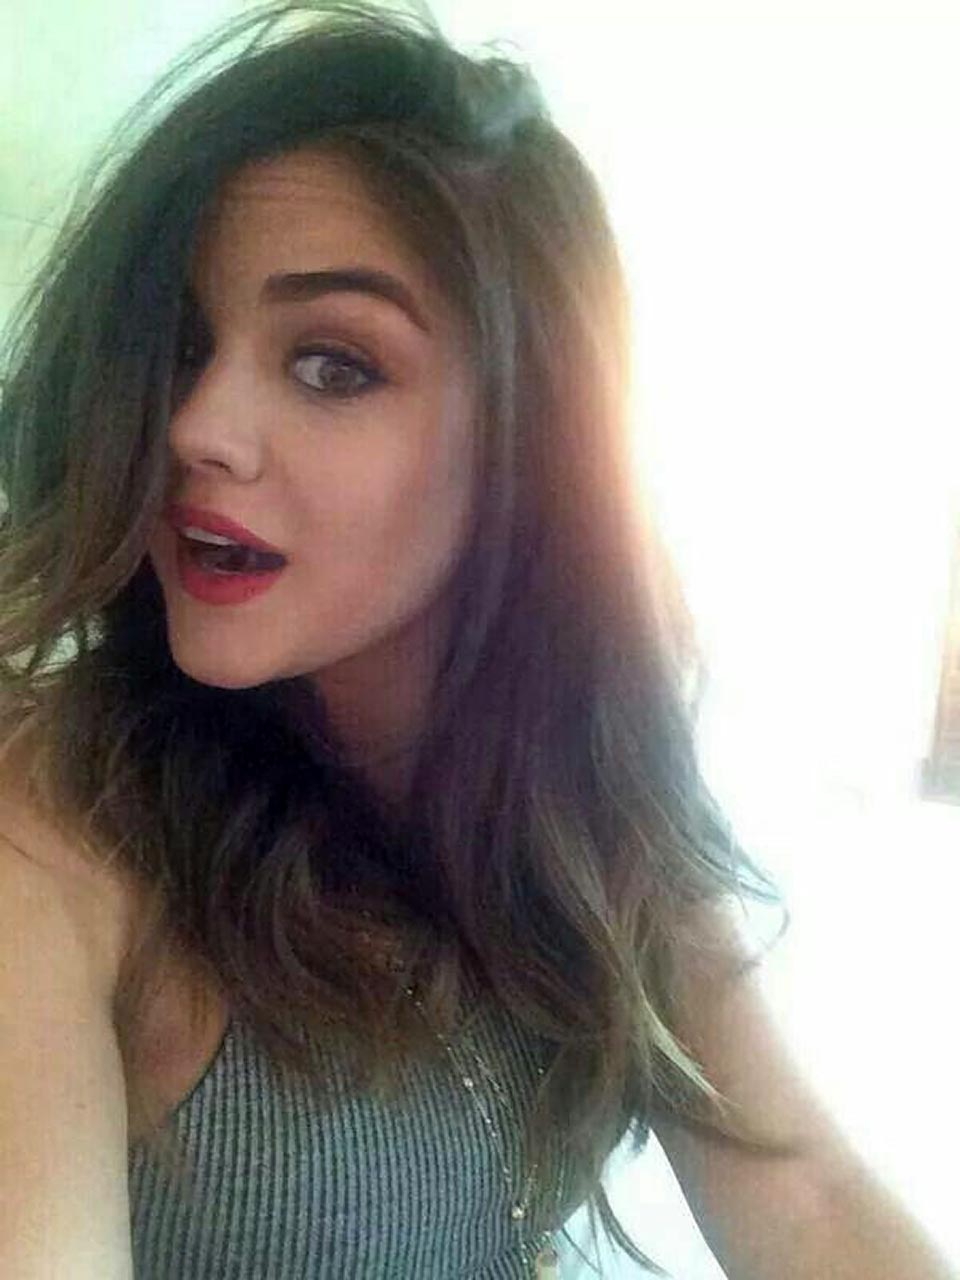 Lucy Hale Leaked Nudes And Private Selfies — Topless Pretty Little Liars Star Scandal Planet